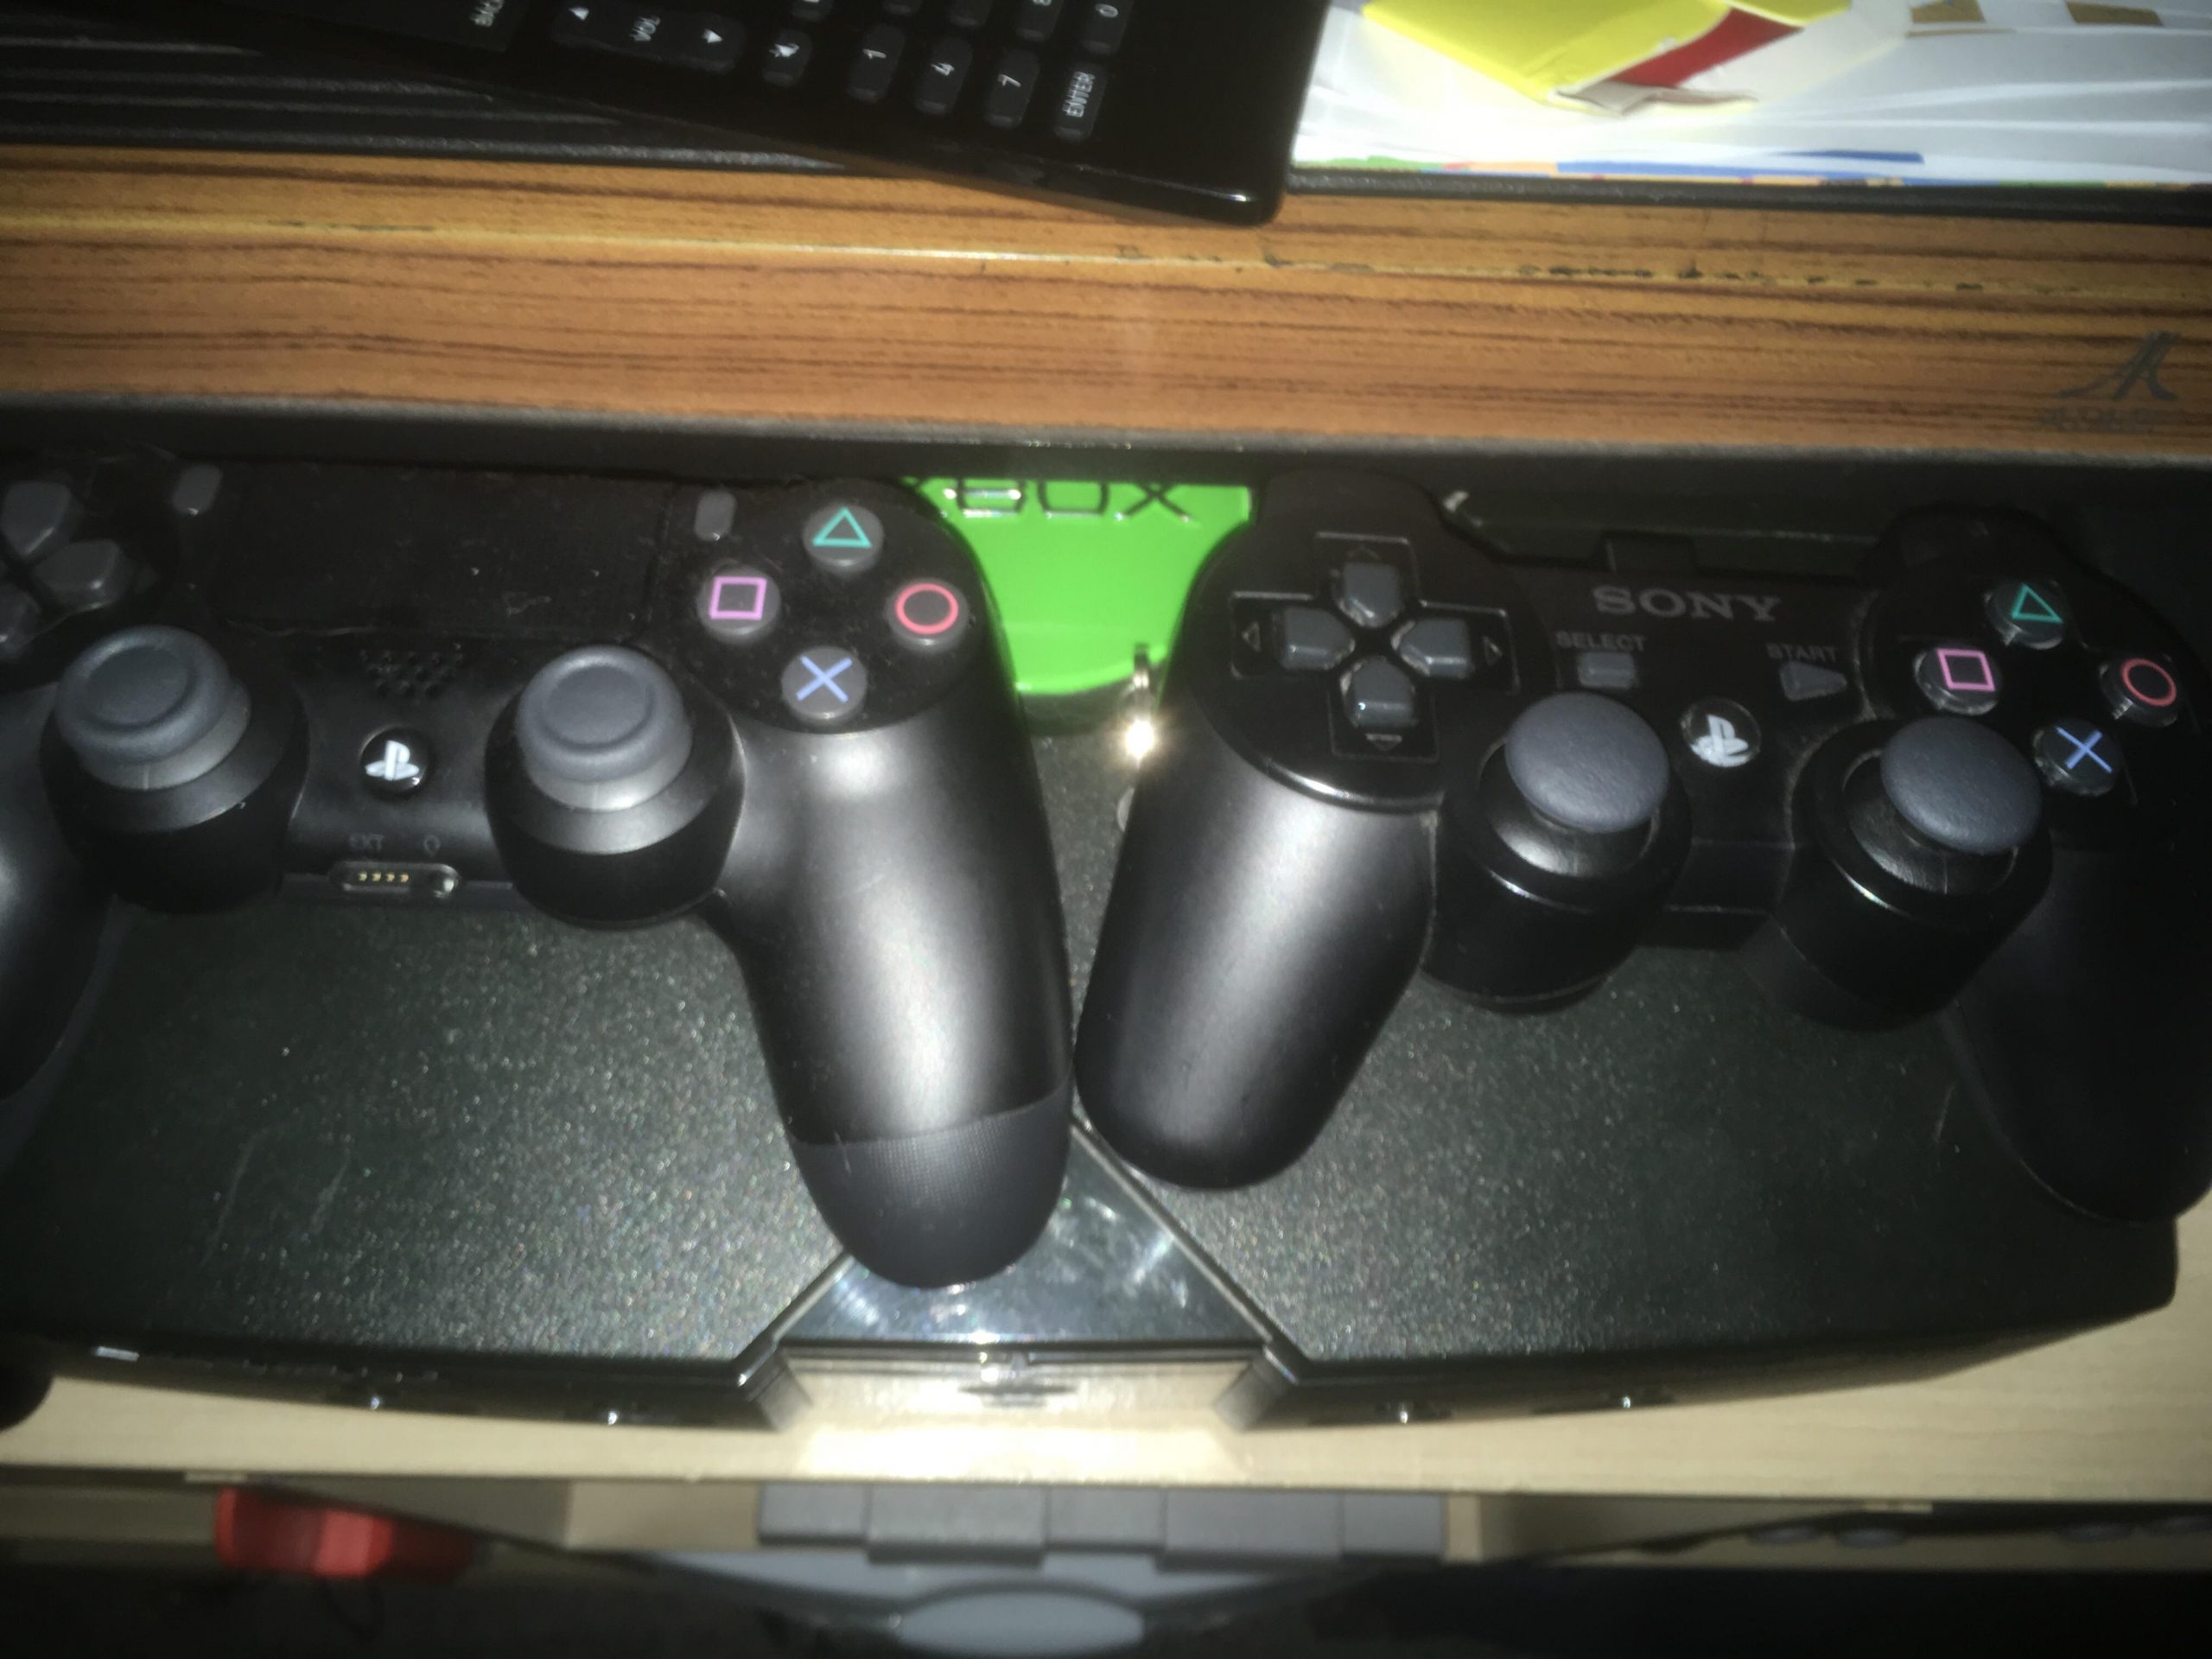 Seeinglooking: Can I Use My Ps3 Controller On My Ps4